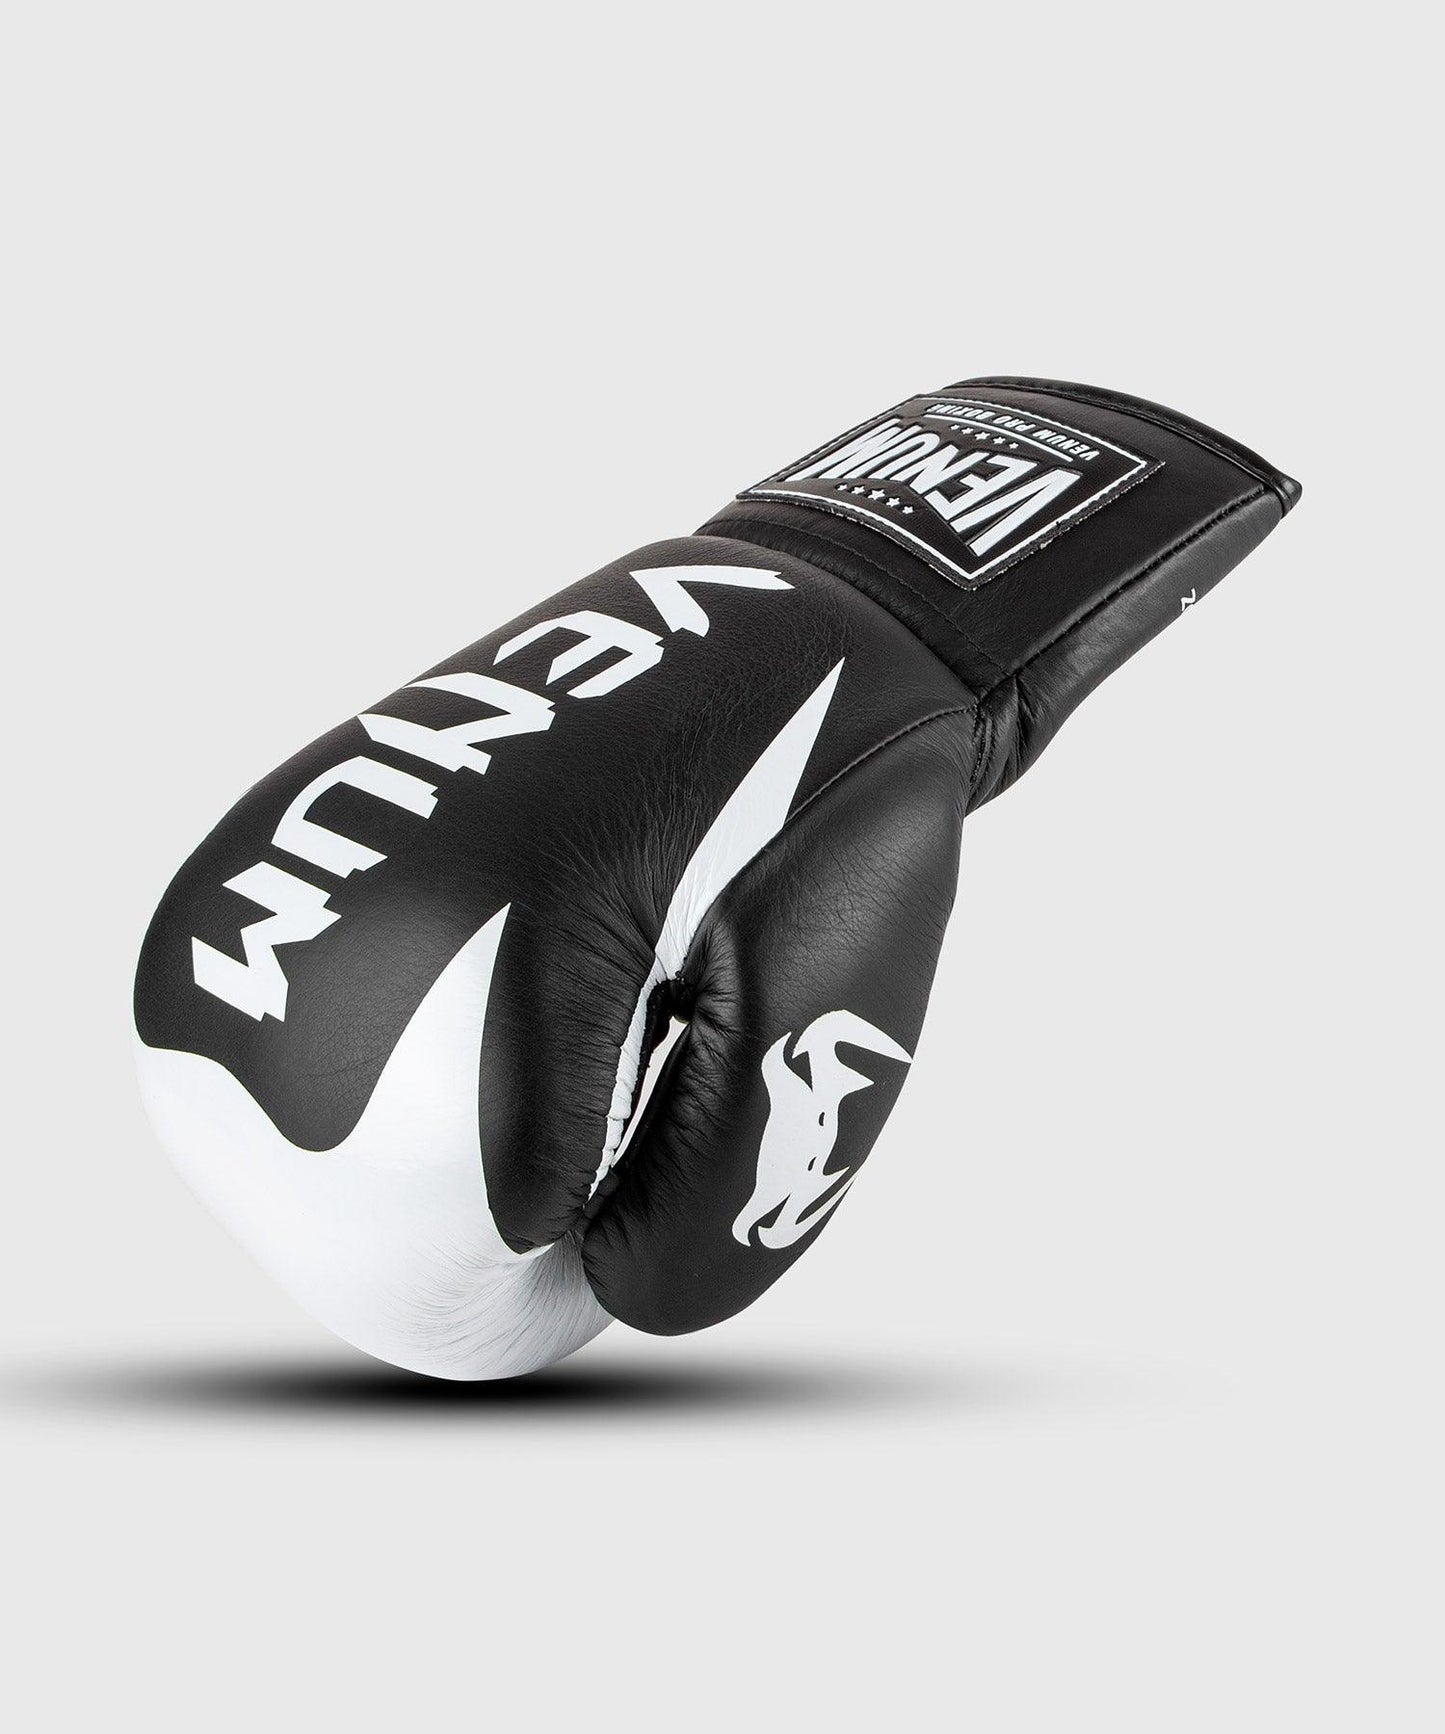 Venum Hammer Pro Boxing Gloves - With Laces - Black/White Picture 1